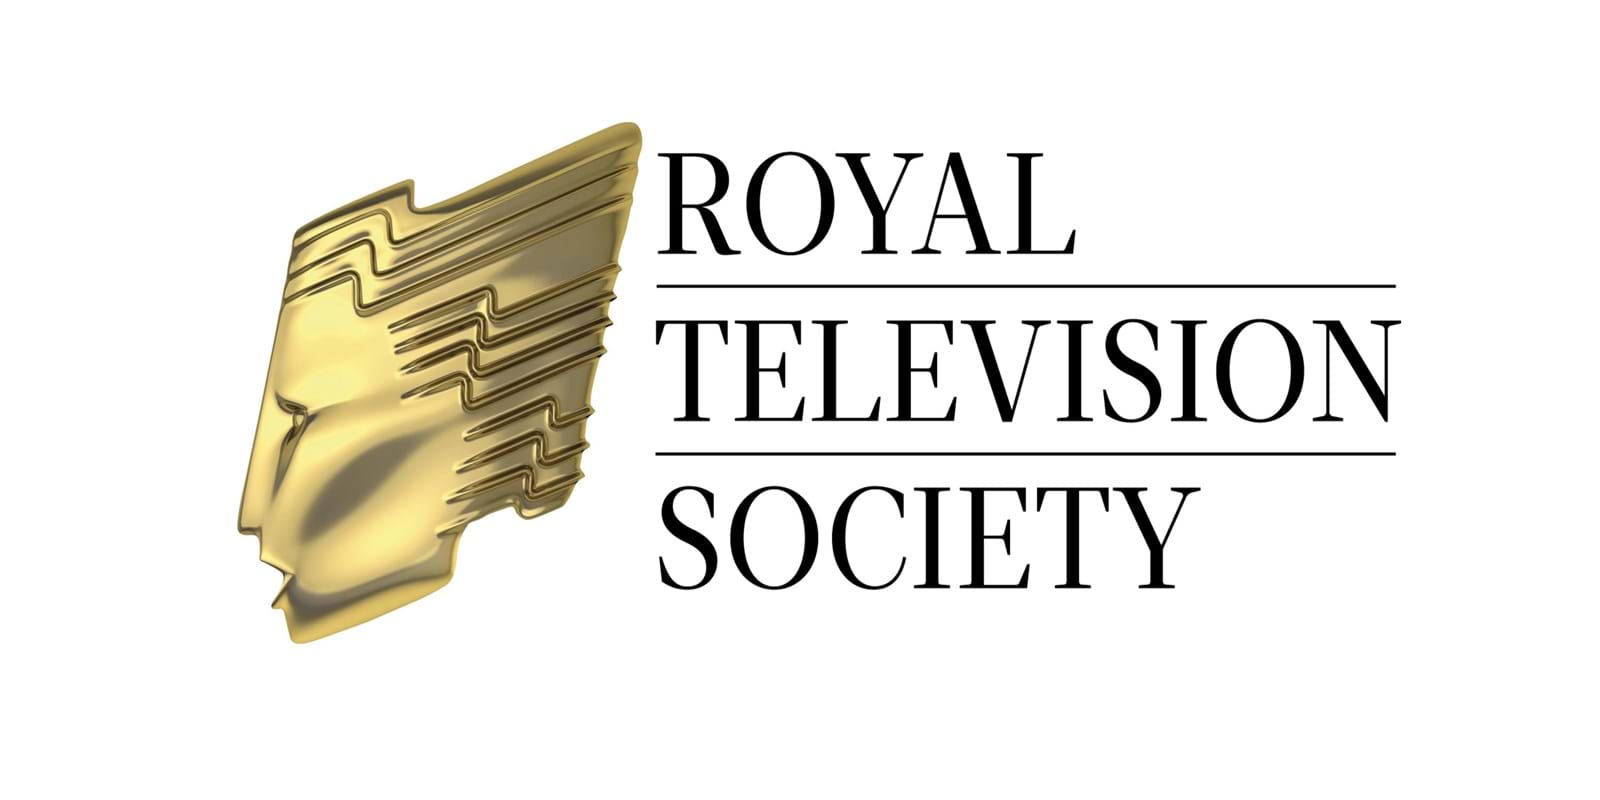 Sunset+Vine nominated for an RTS Programme Award!